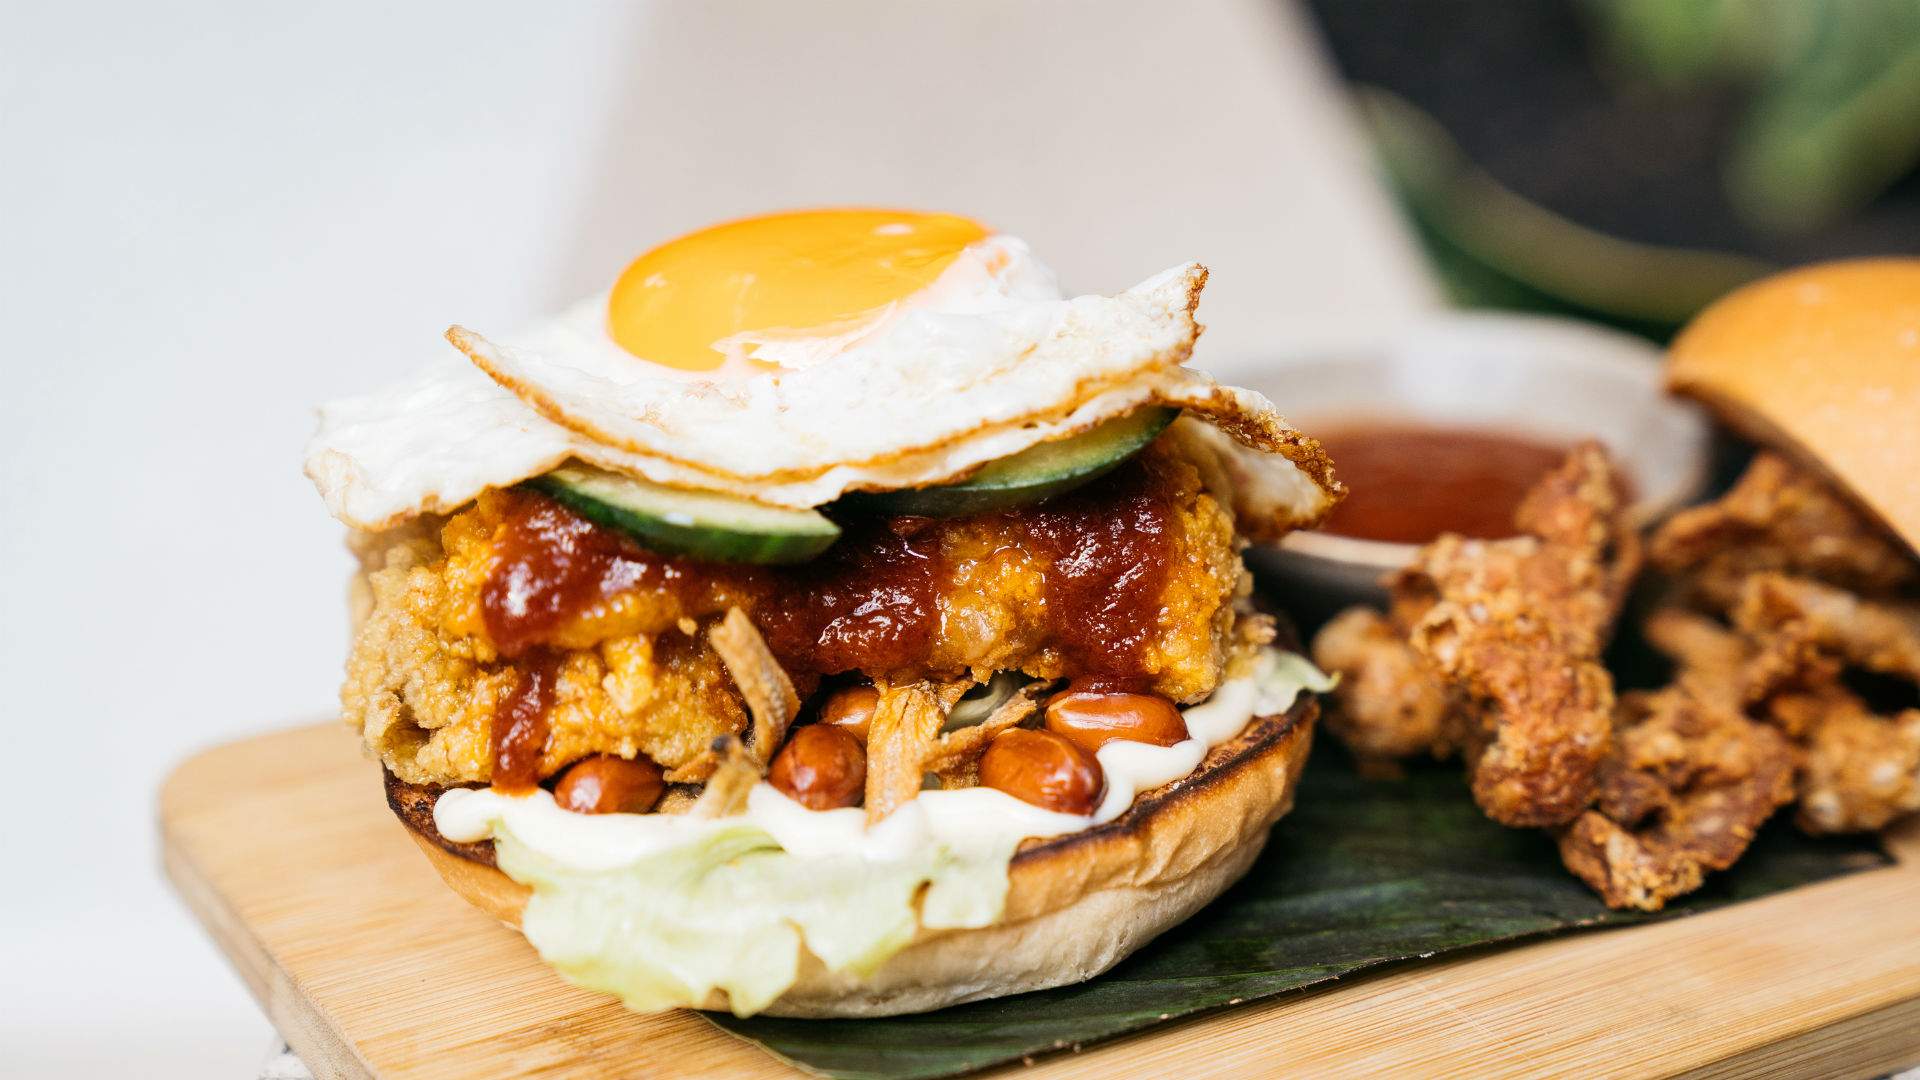 PappaRich Is Launching a Limited-Edition Nasi Lemak Burger This Winter